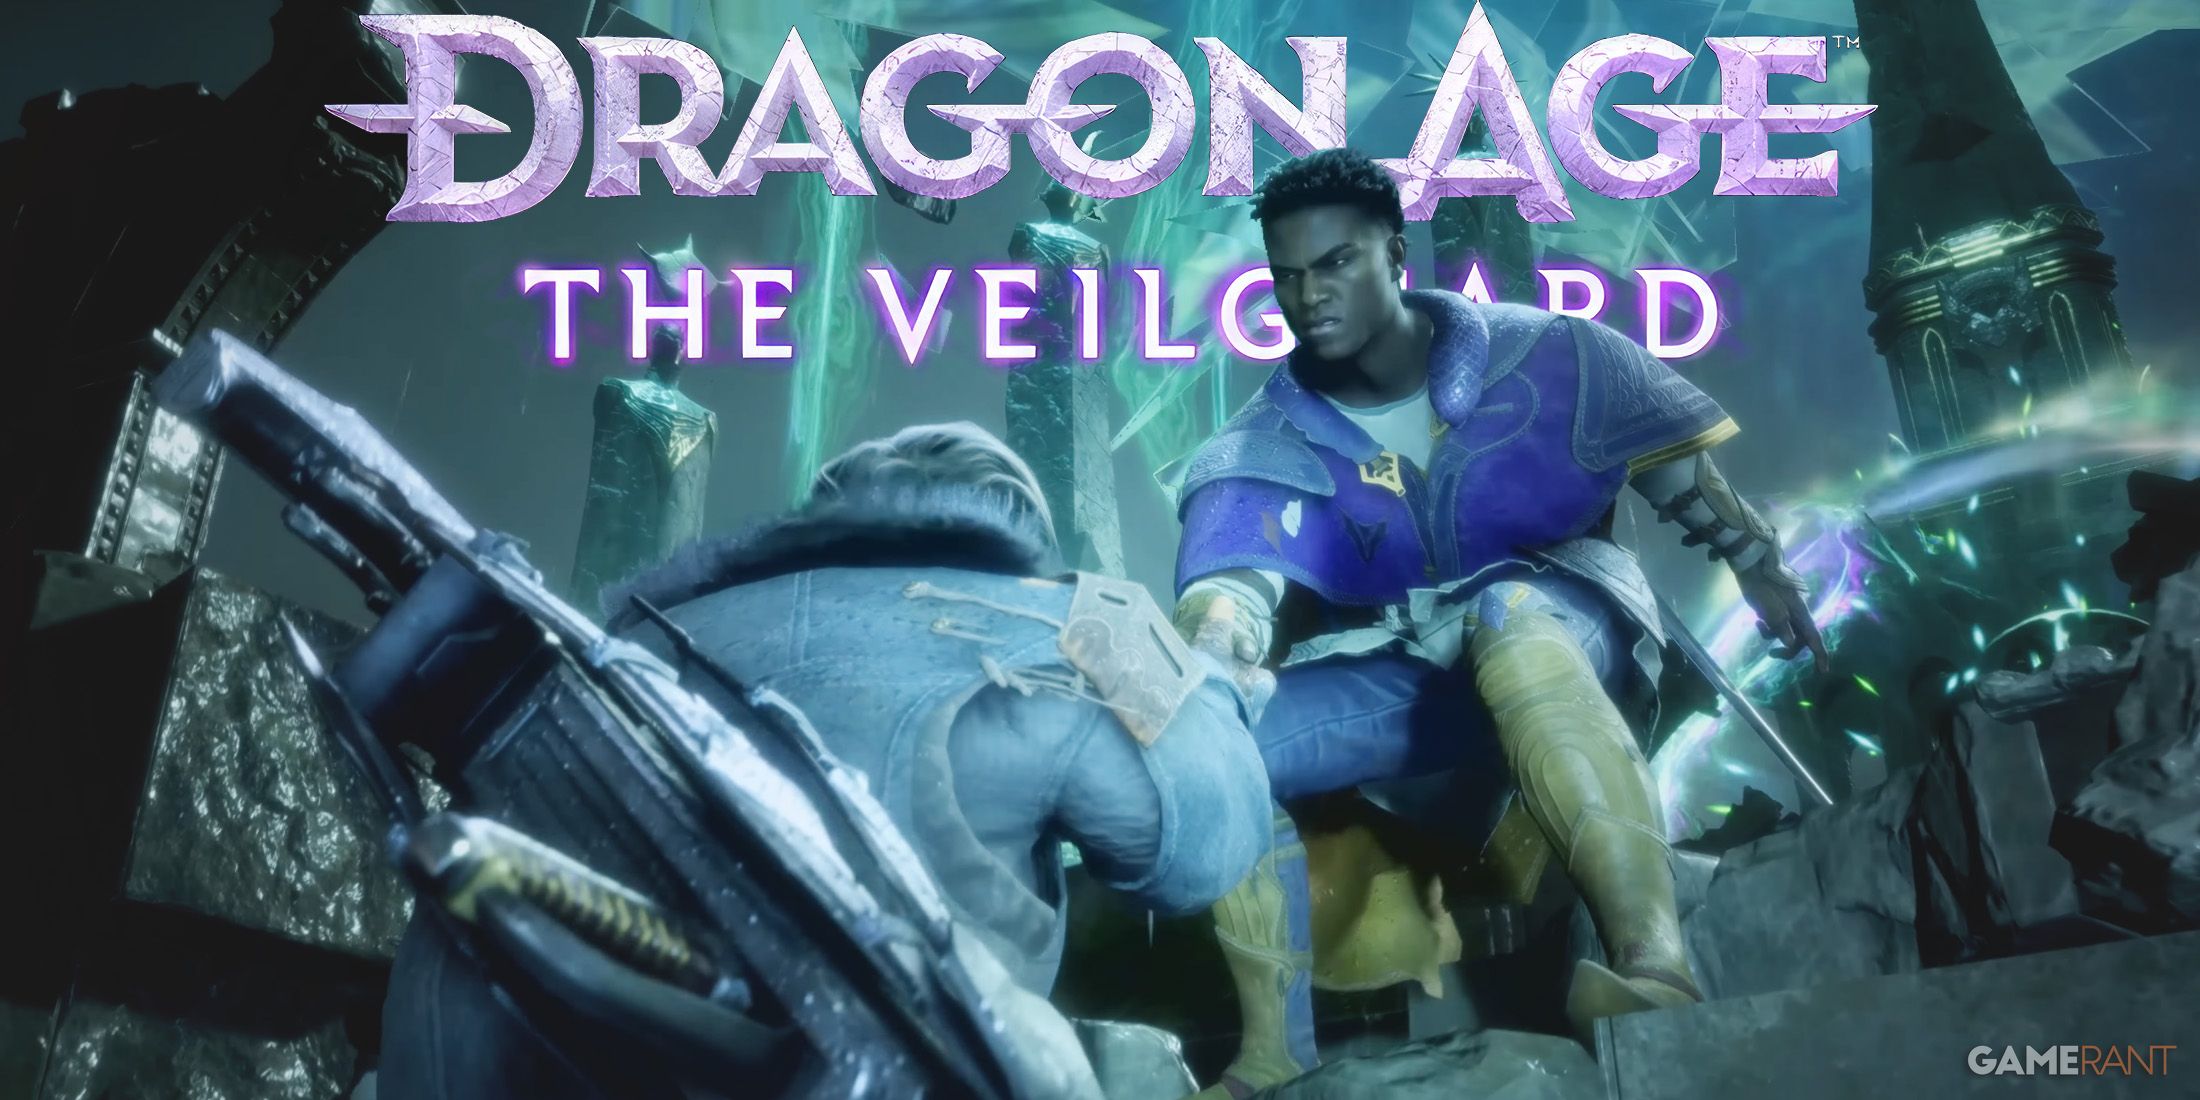 Dragon Age The Veilguard helping hand gameplay reveal screenshot with game logo